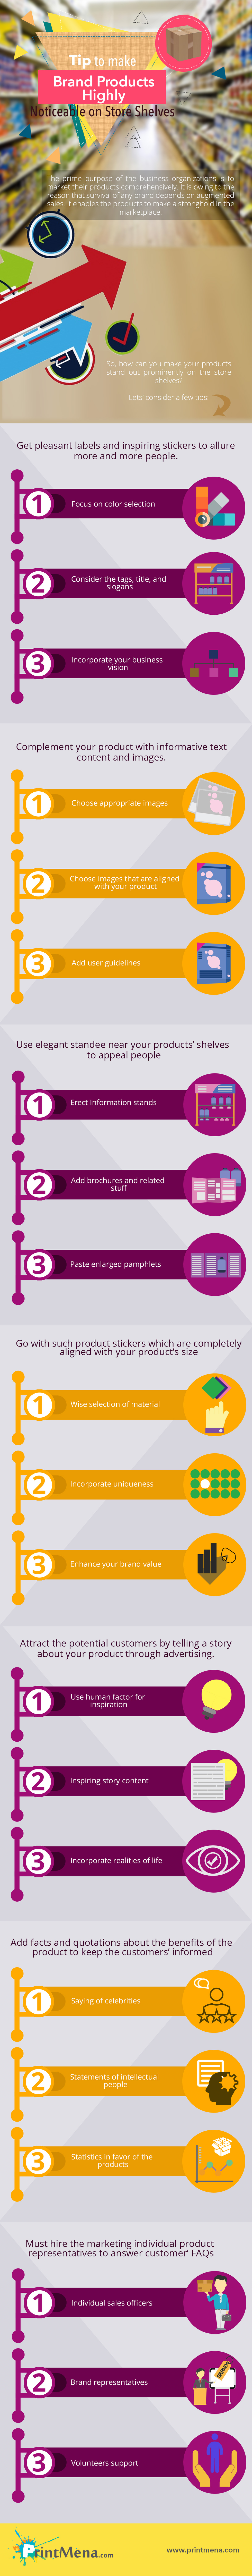 Tips To Make Brand Products Highly Noticeable On Store Shelves